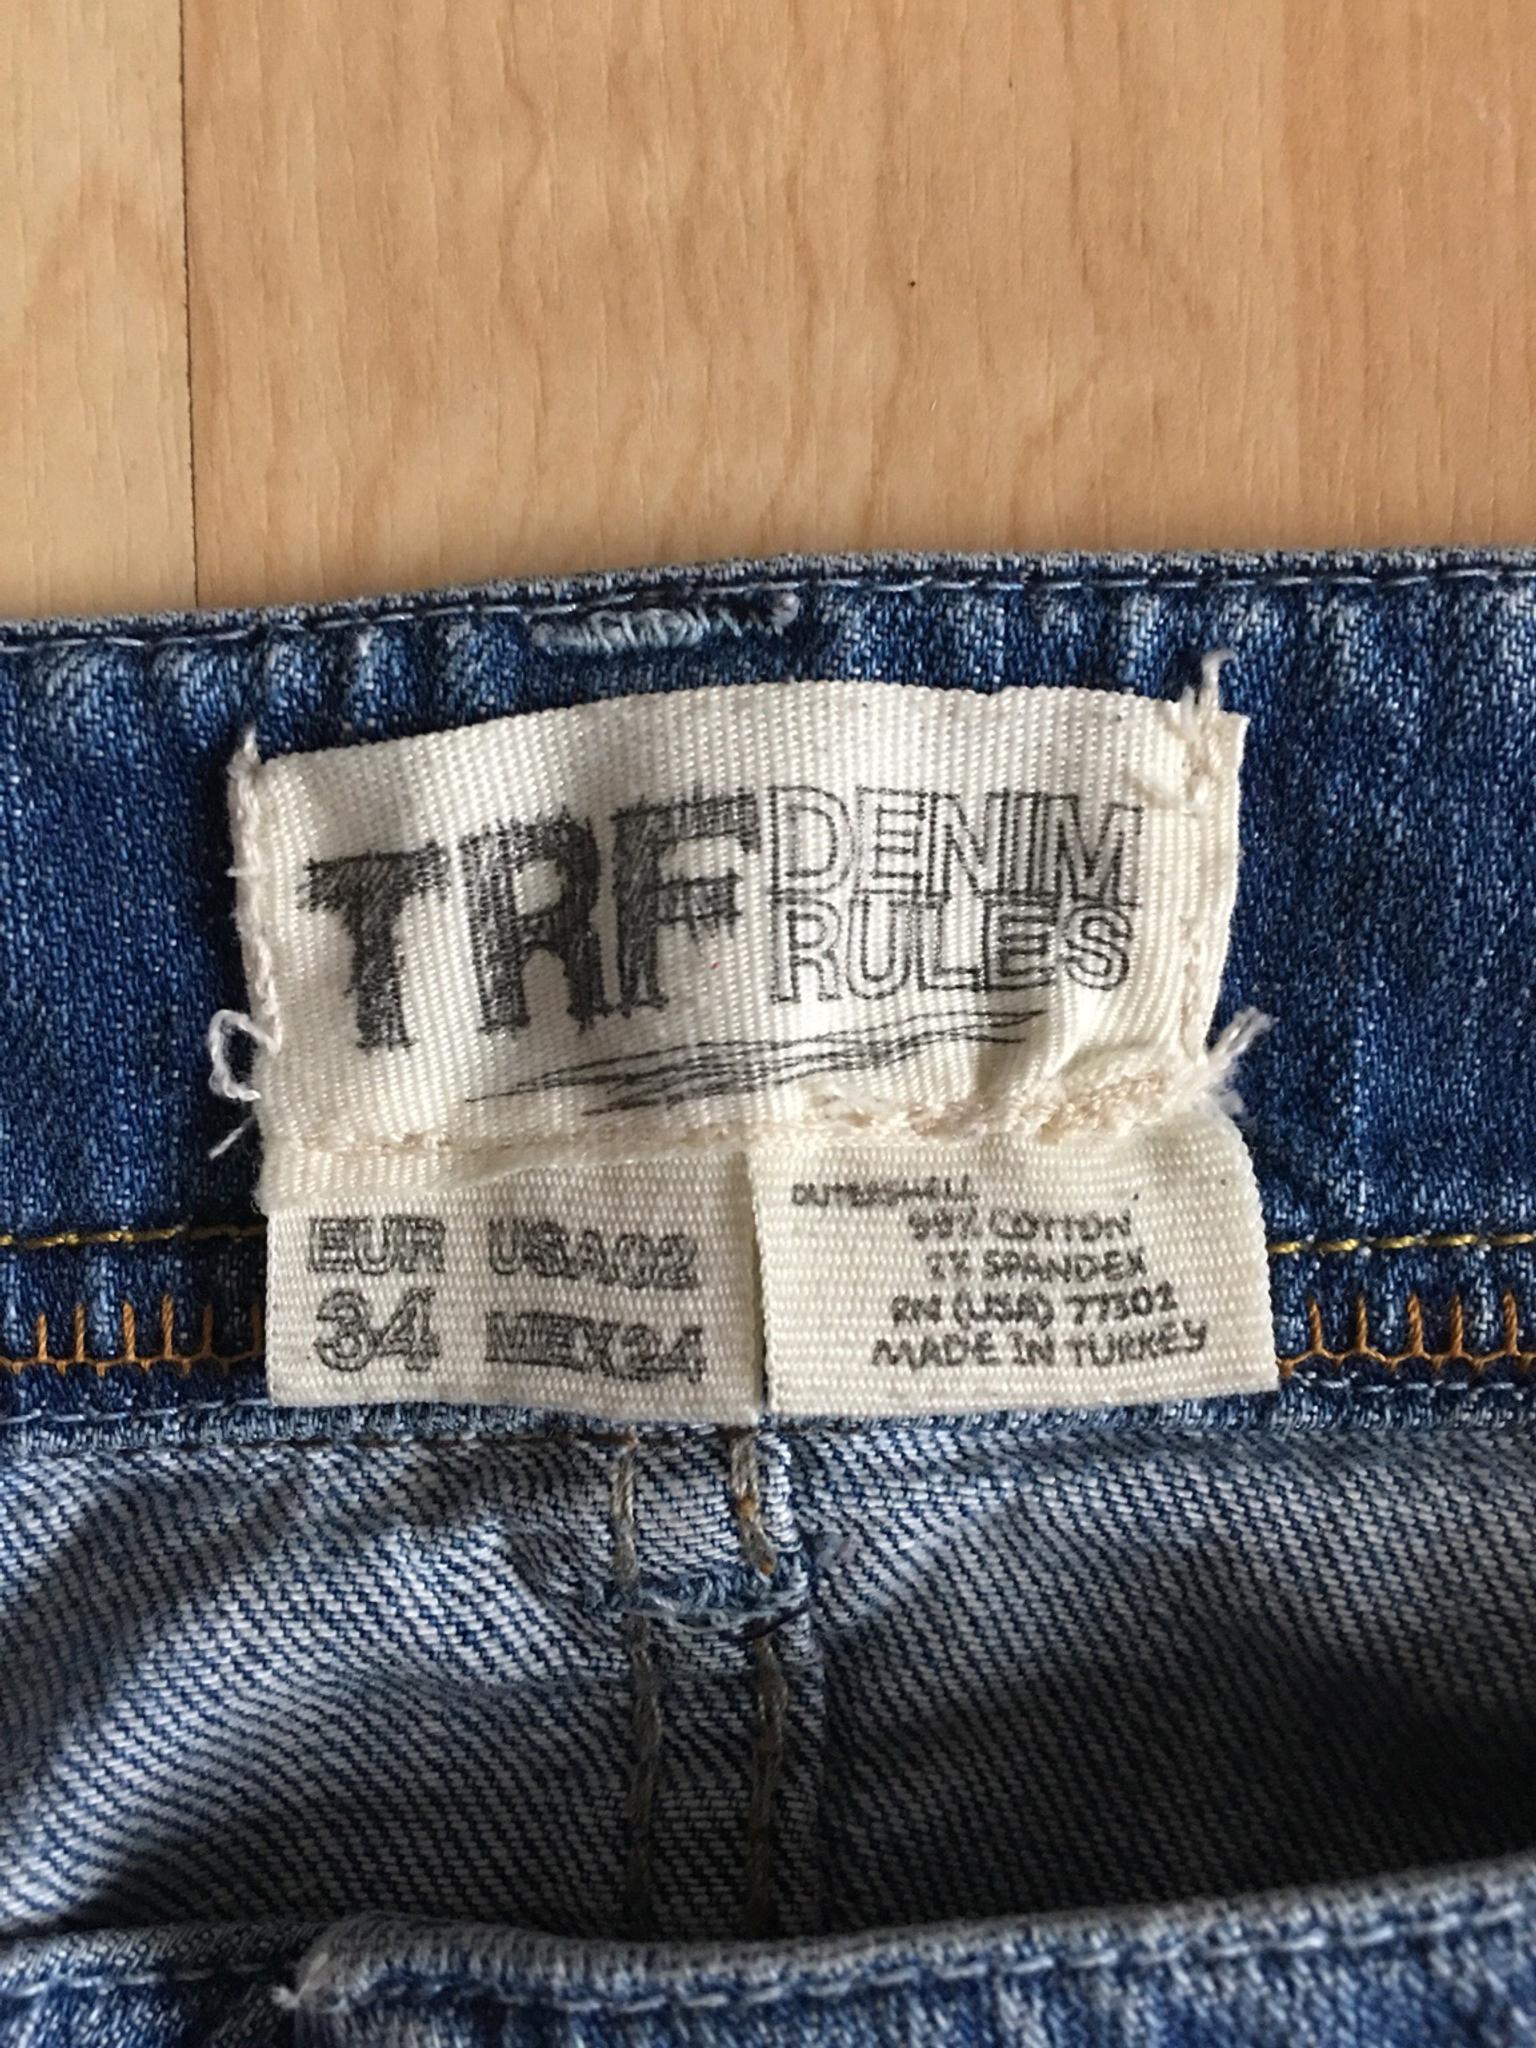 trf jeans